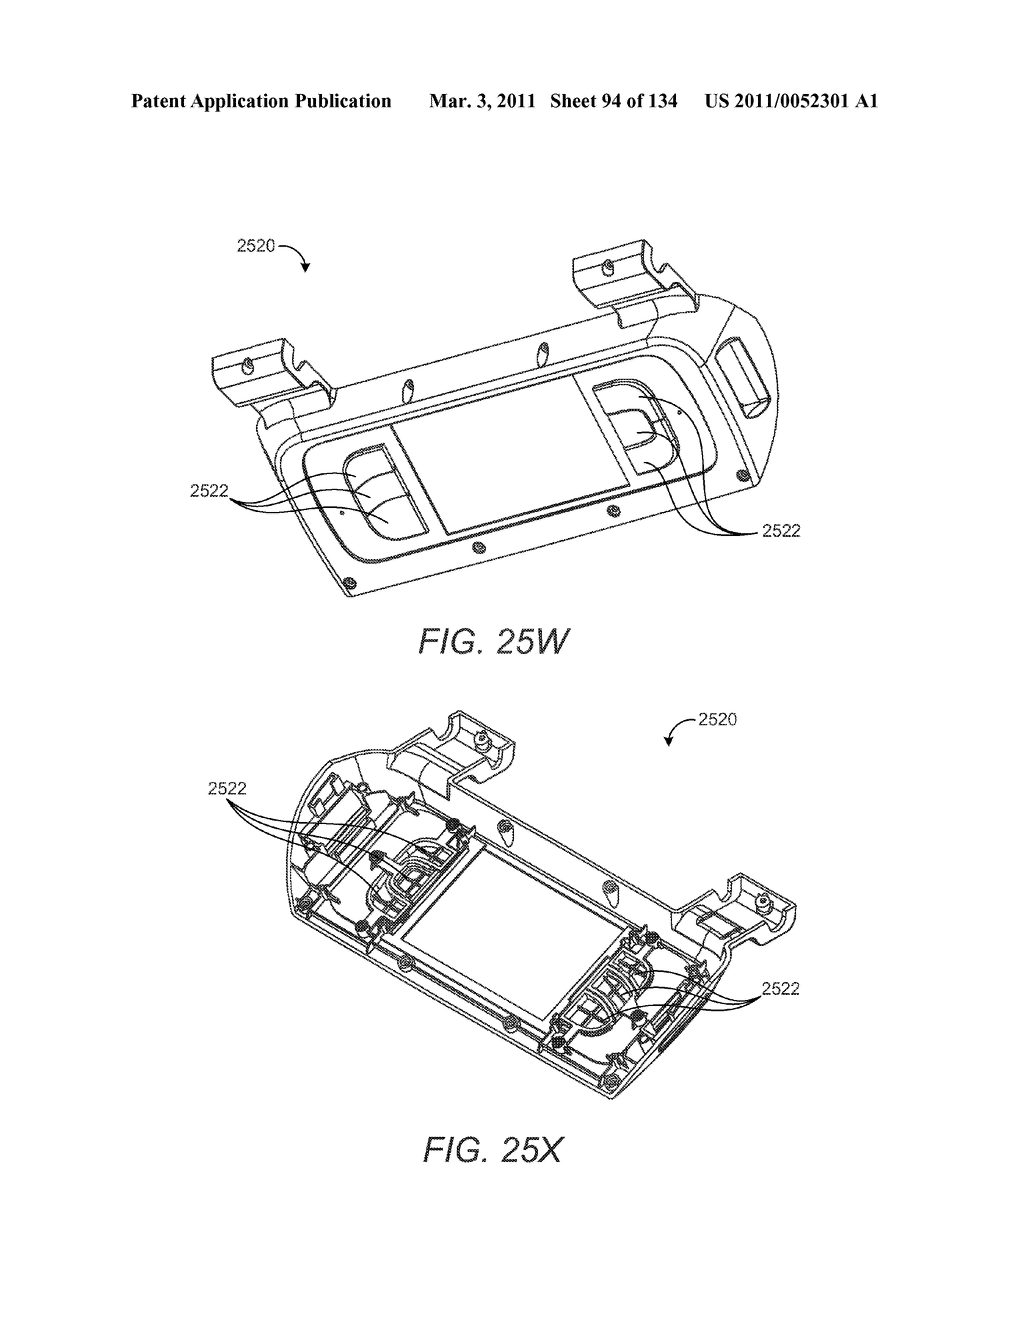 (Moab Omnibus-Apparatus) Crafting Apparatus Including a Workpiece Feed Path Bypass Assembly and Workpiece Feed Path Analyzer - diagram, schematic, and image 95